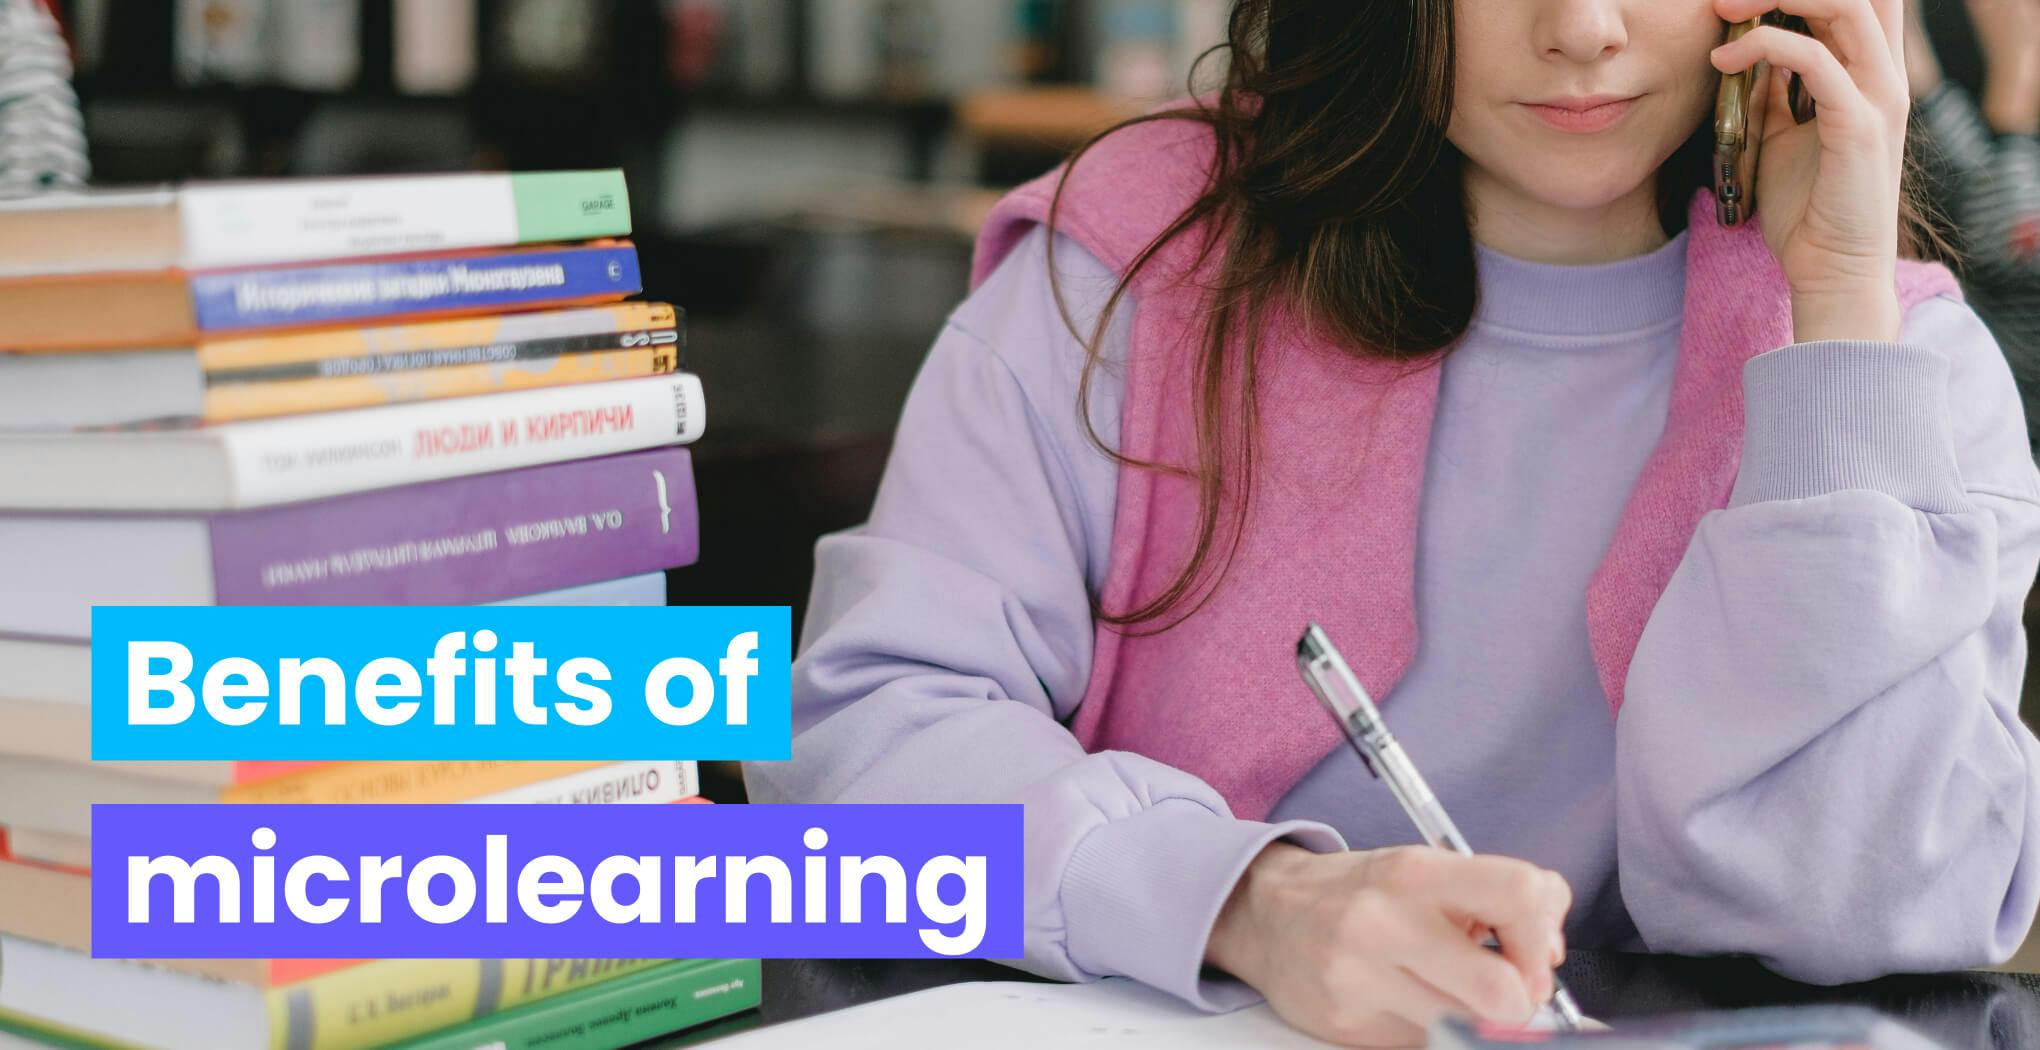 10 Benefits of microlearning